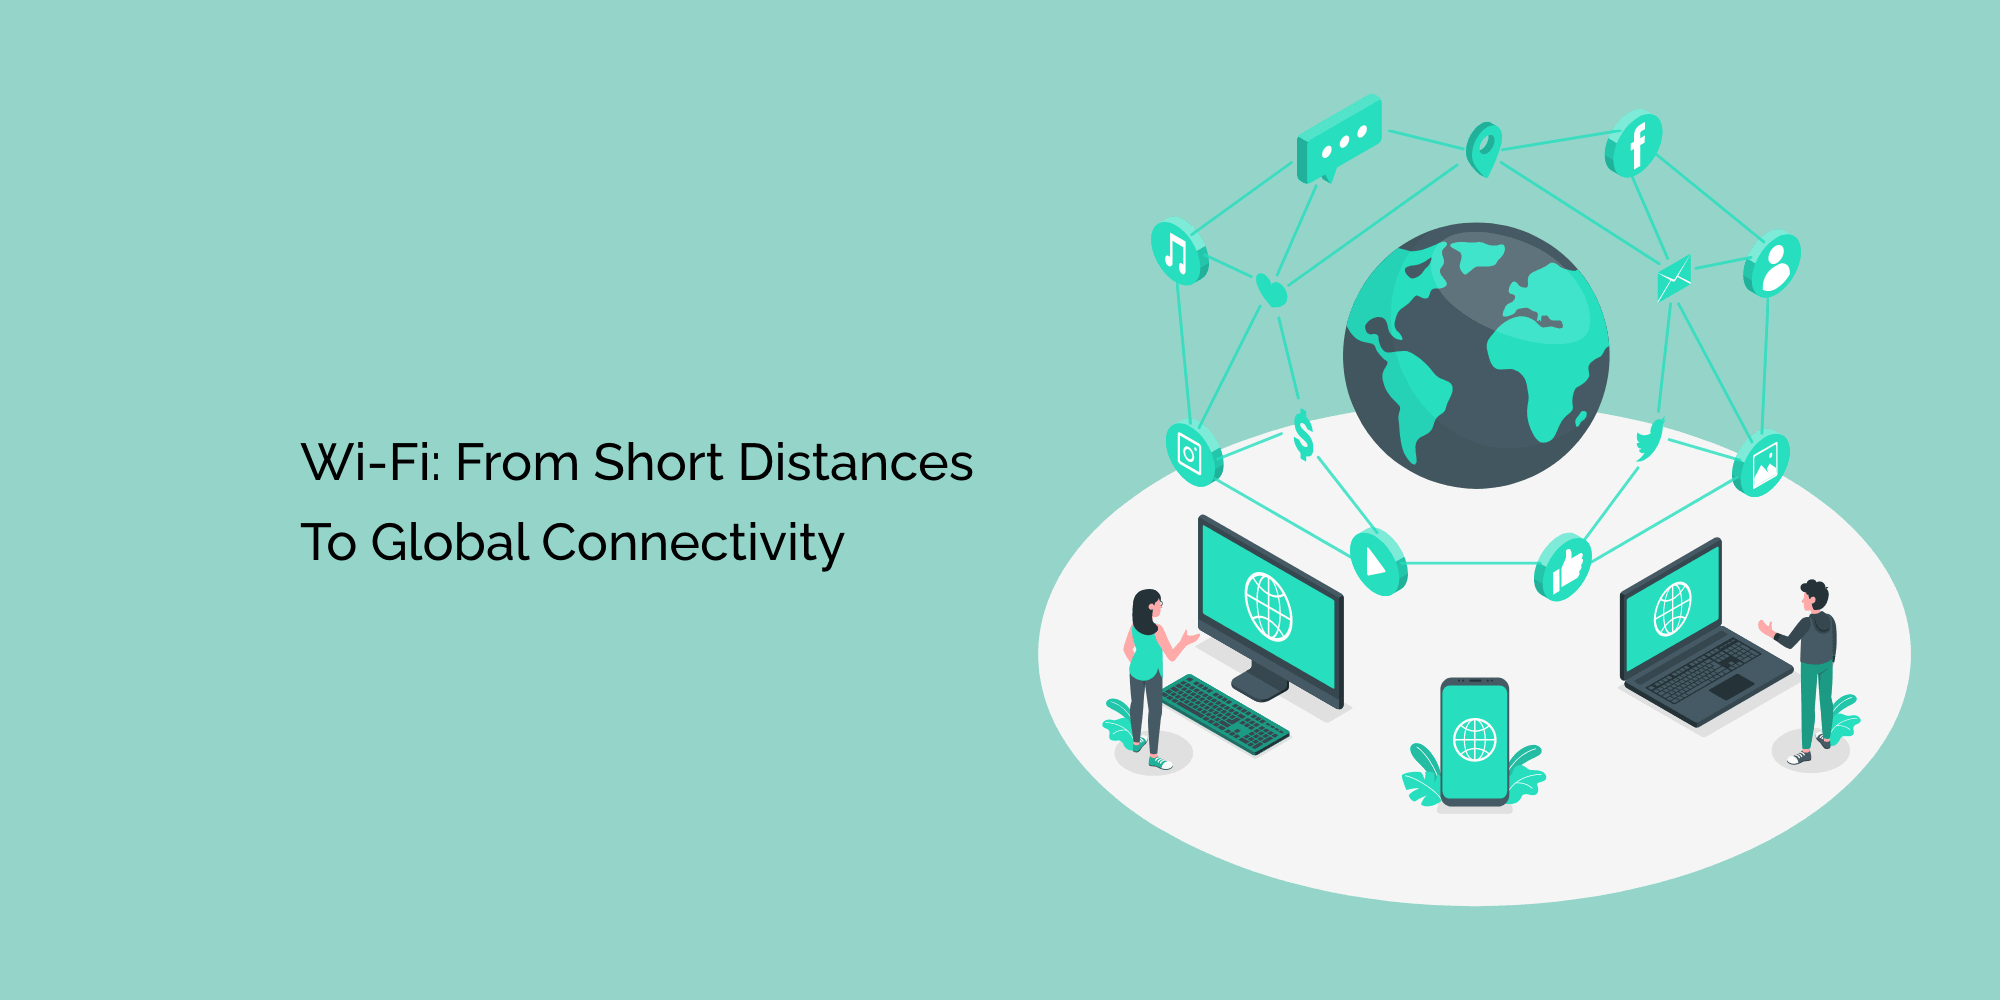 Wi-Fi: From Short Distances to Global Connectivity